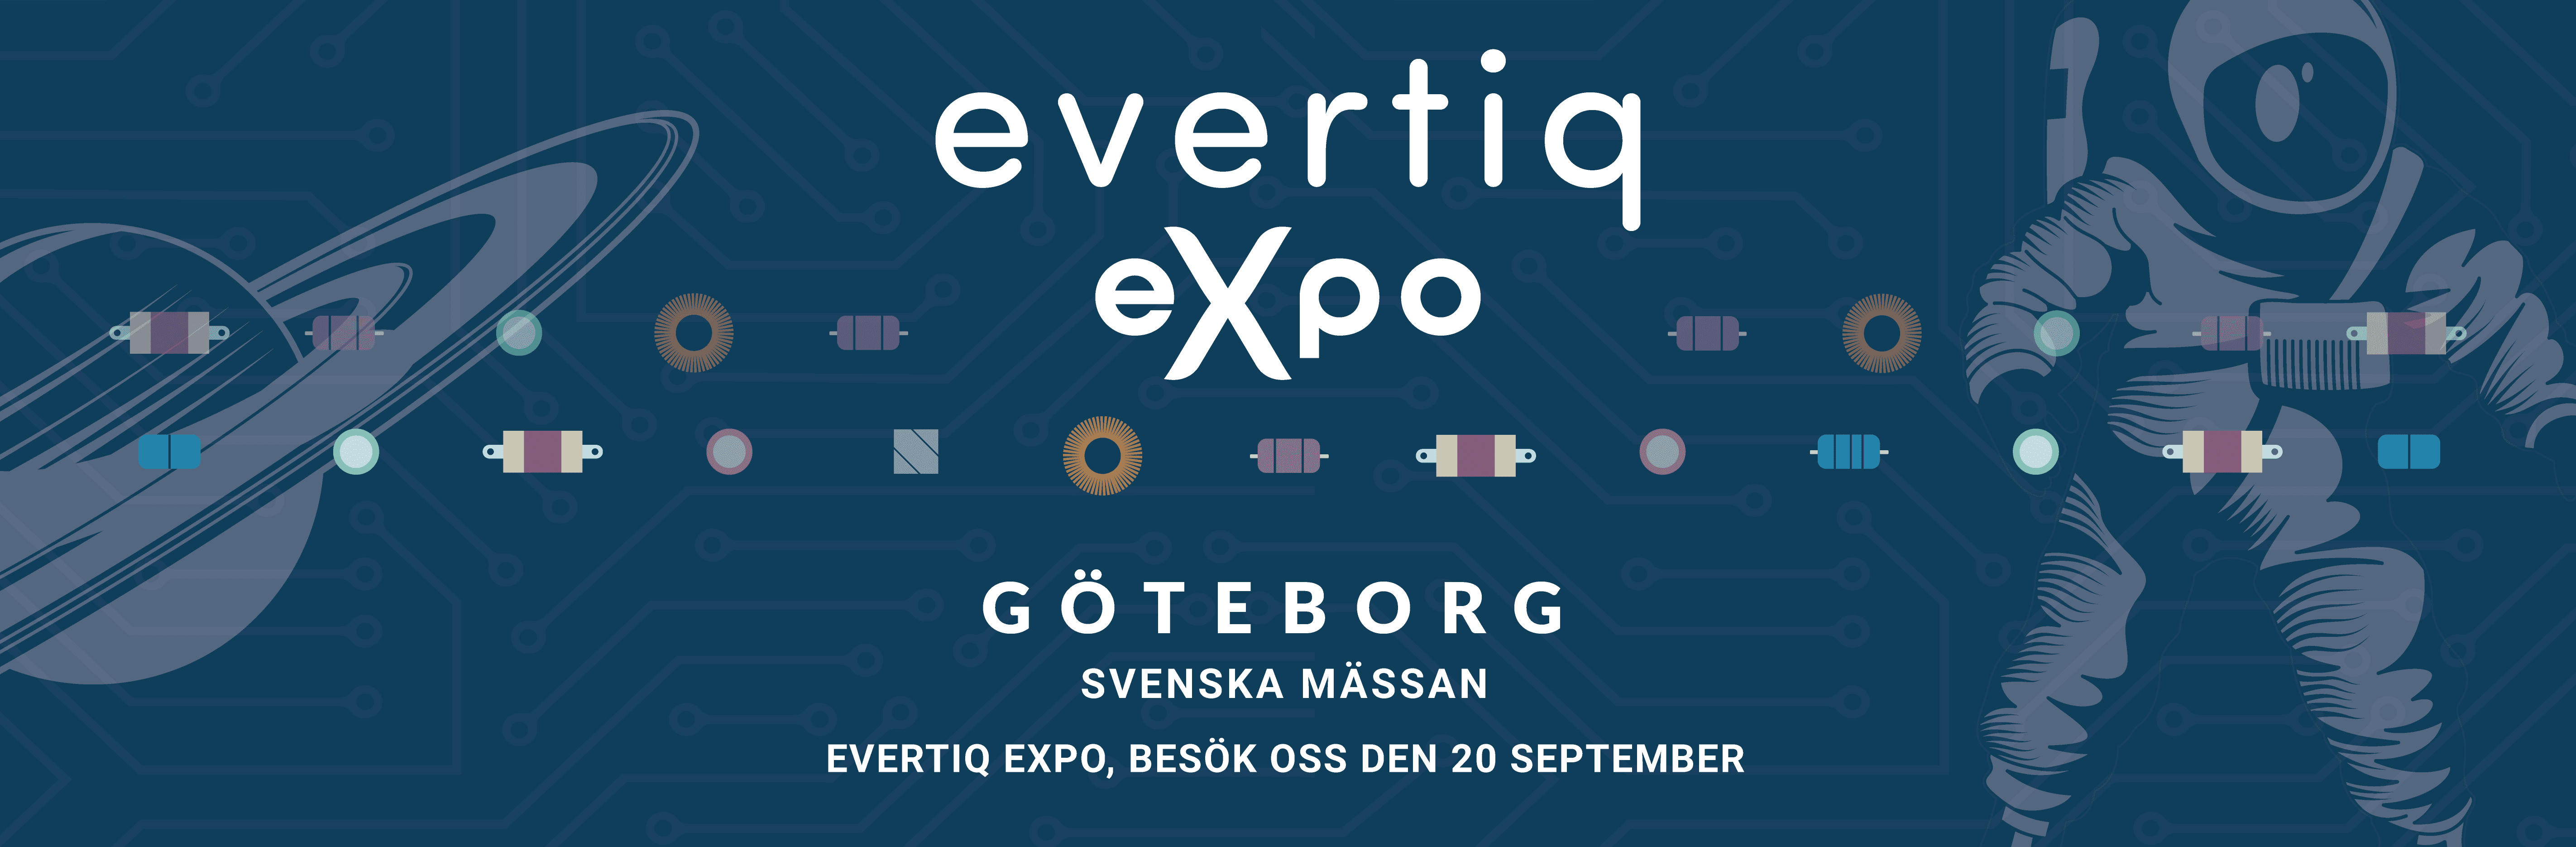 Event picture from Evertiq